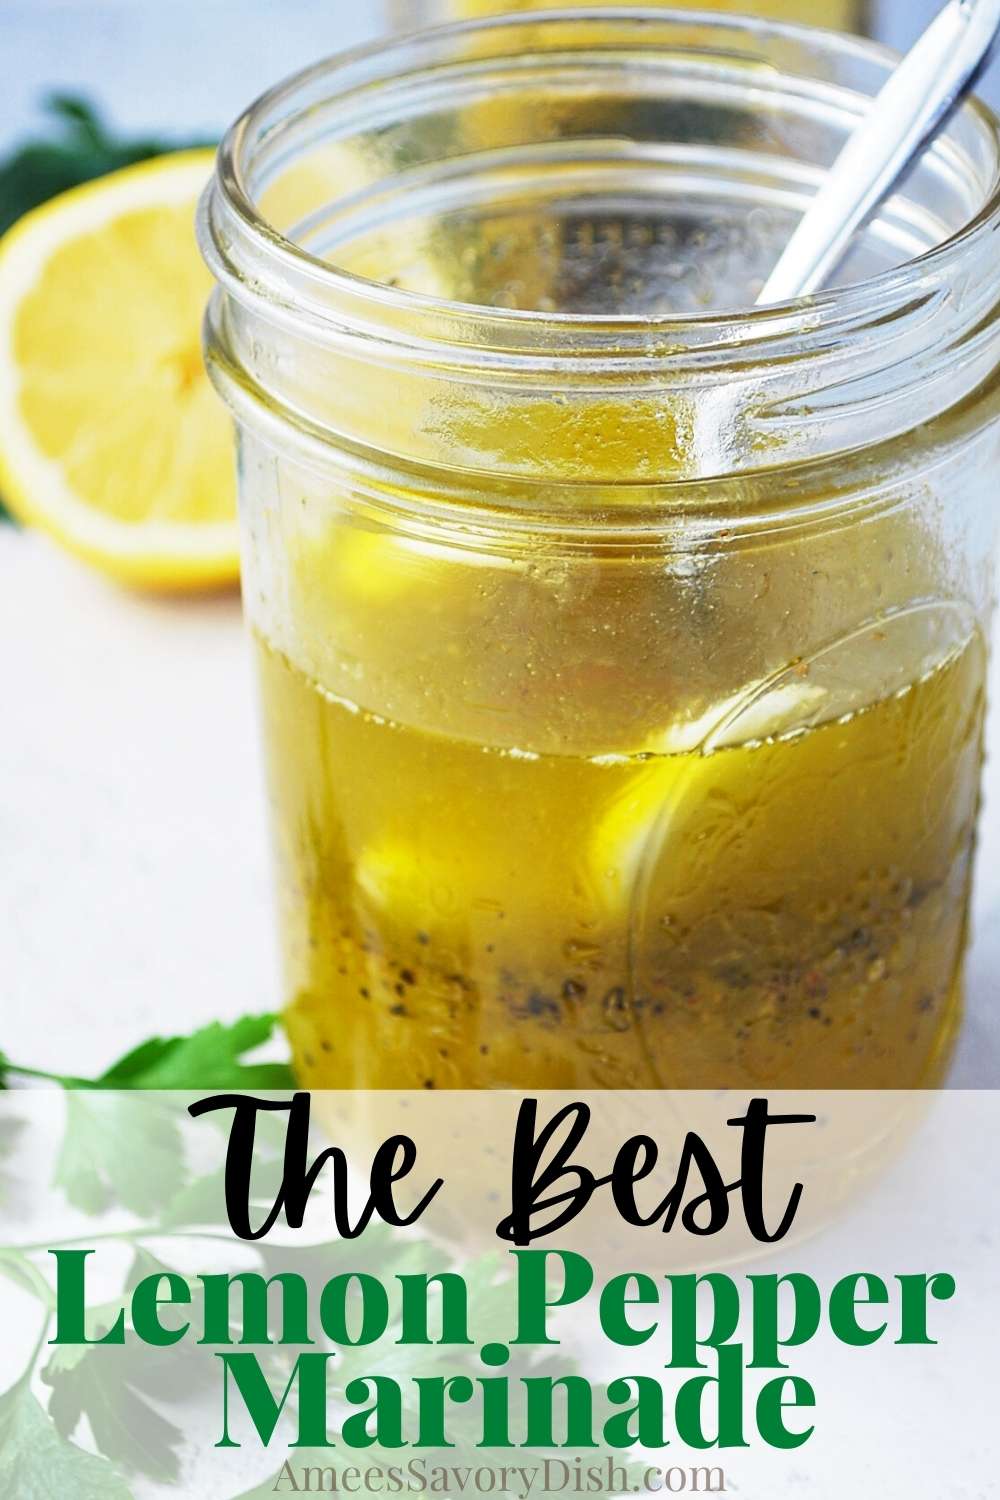 Lemon pepper marinade is a simple but flavorful marinade for chicken or shrimp. This easy marinade recipe can also be used to make a delicious, tangy salad dressing! via @Ameessavorydish